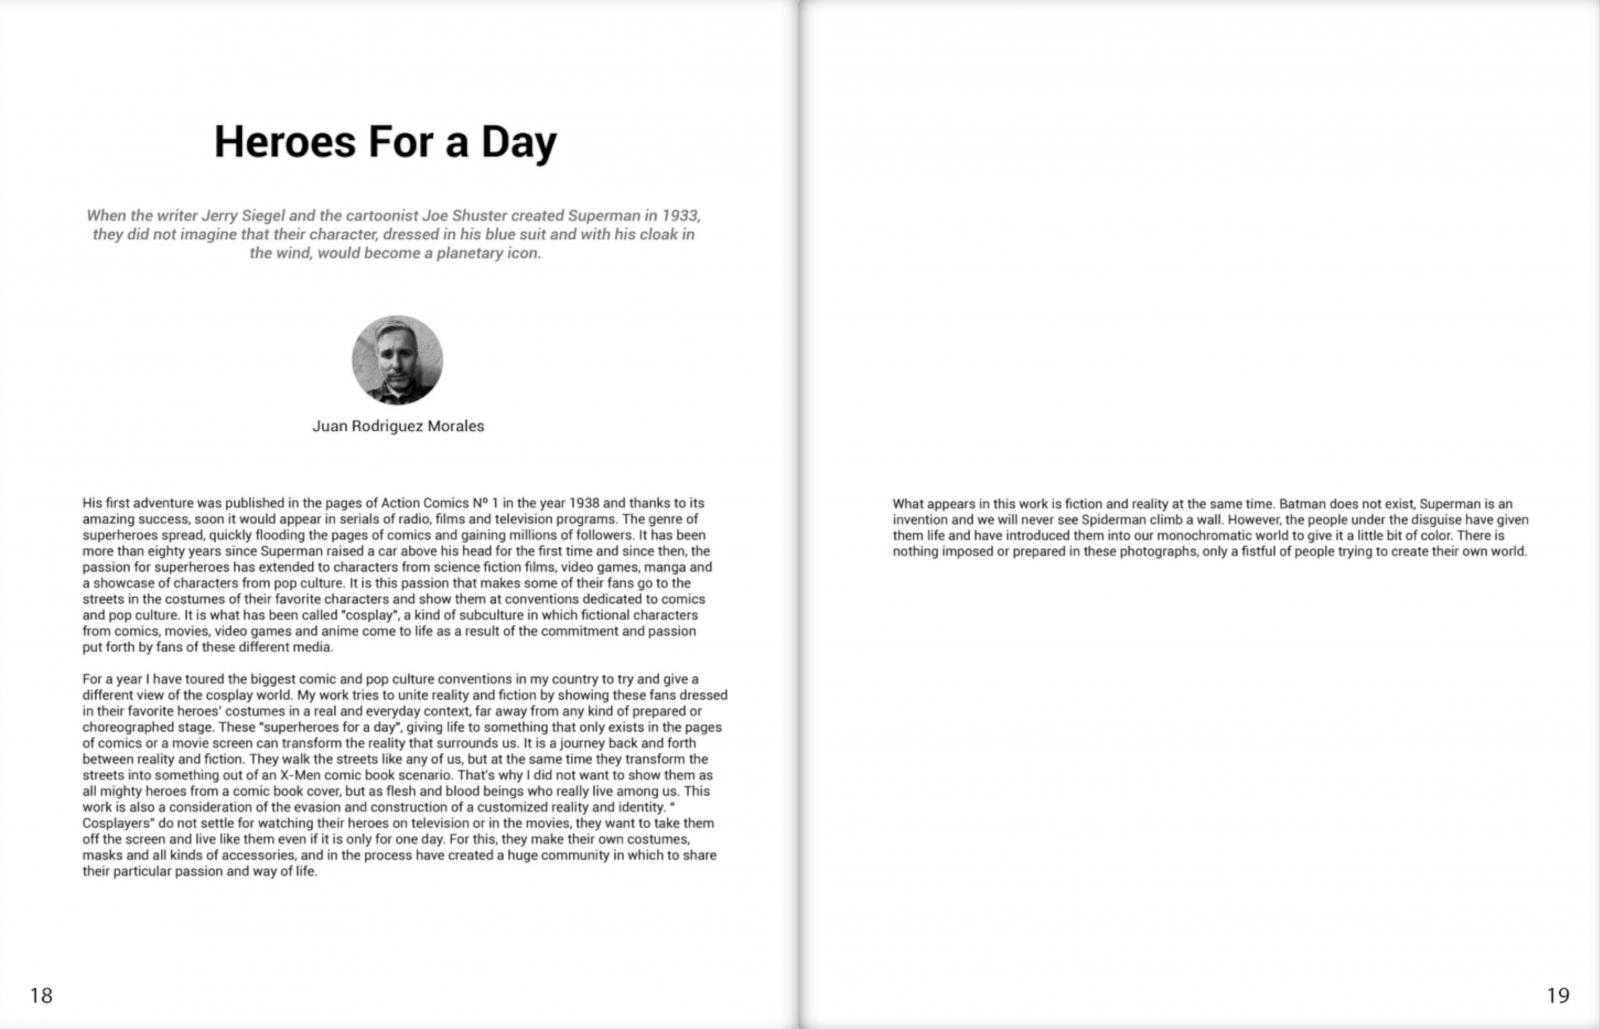 Heroes for a day in Docu Magazine